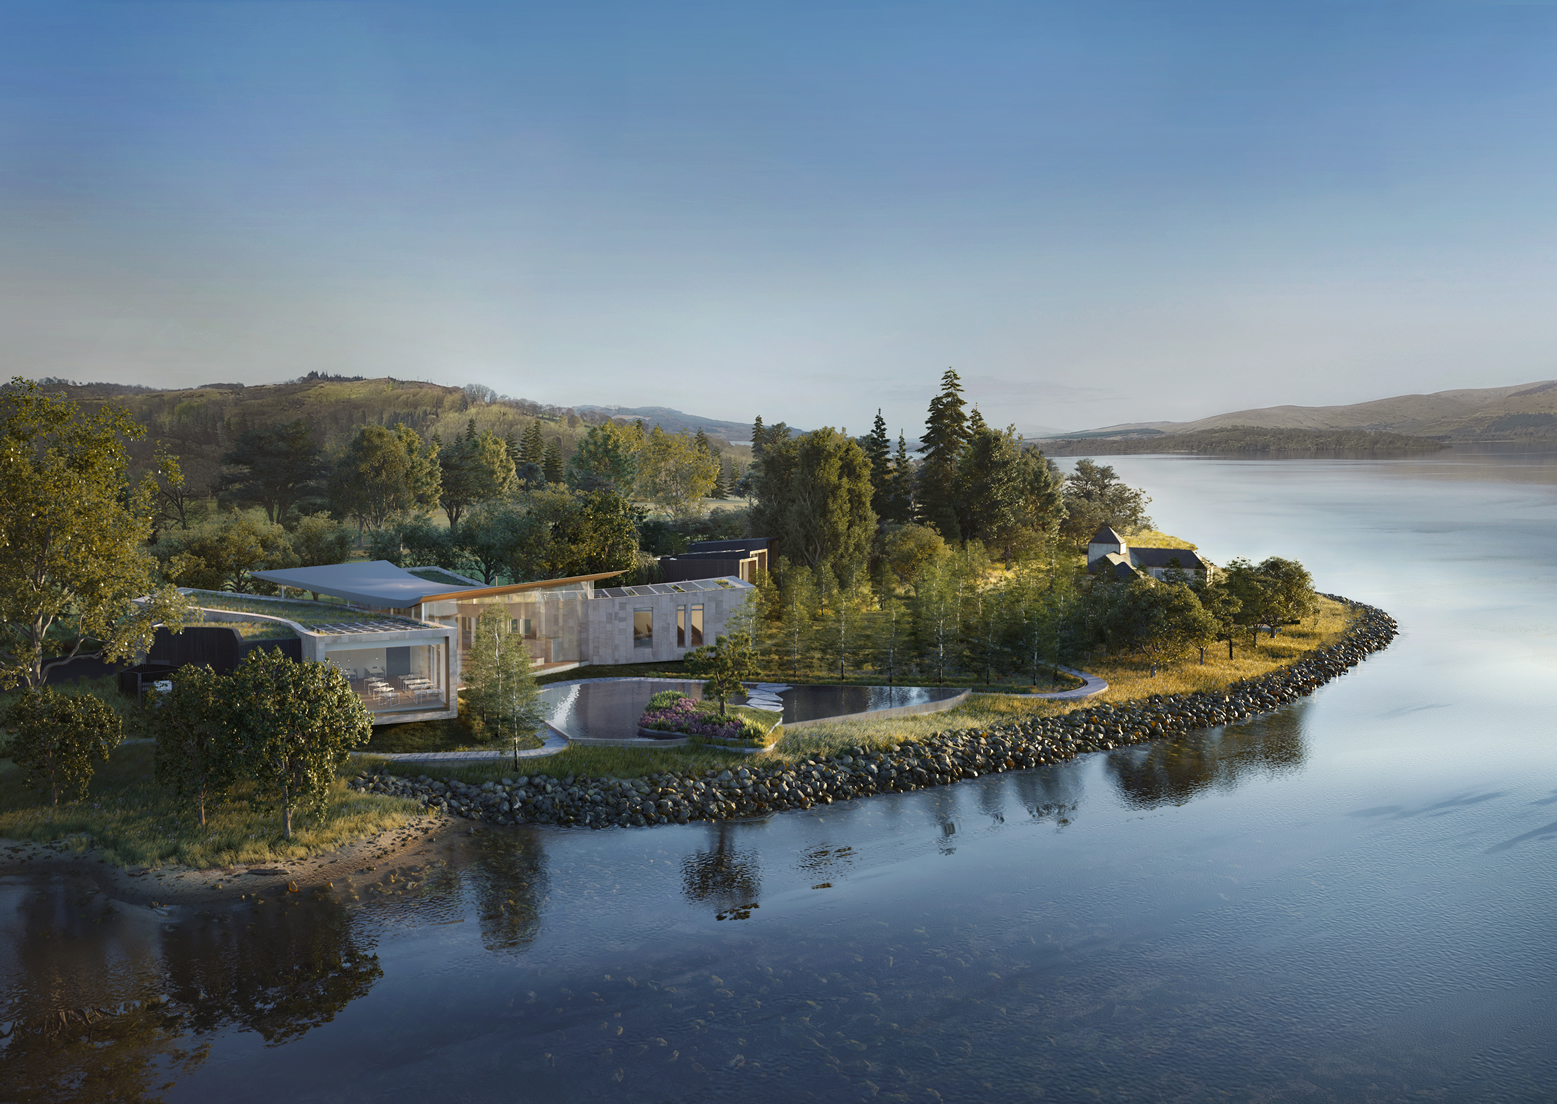 The Hunter Foundation plans to build teaching centre on banks of Loch Lomond